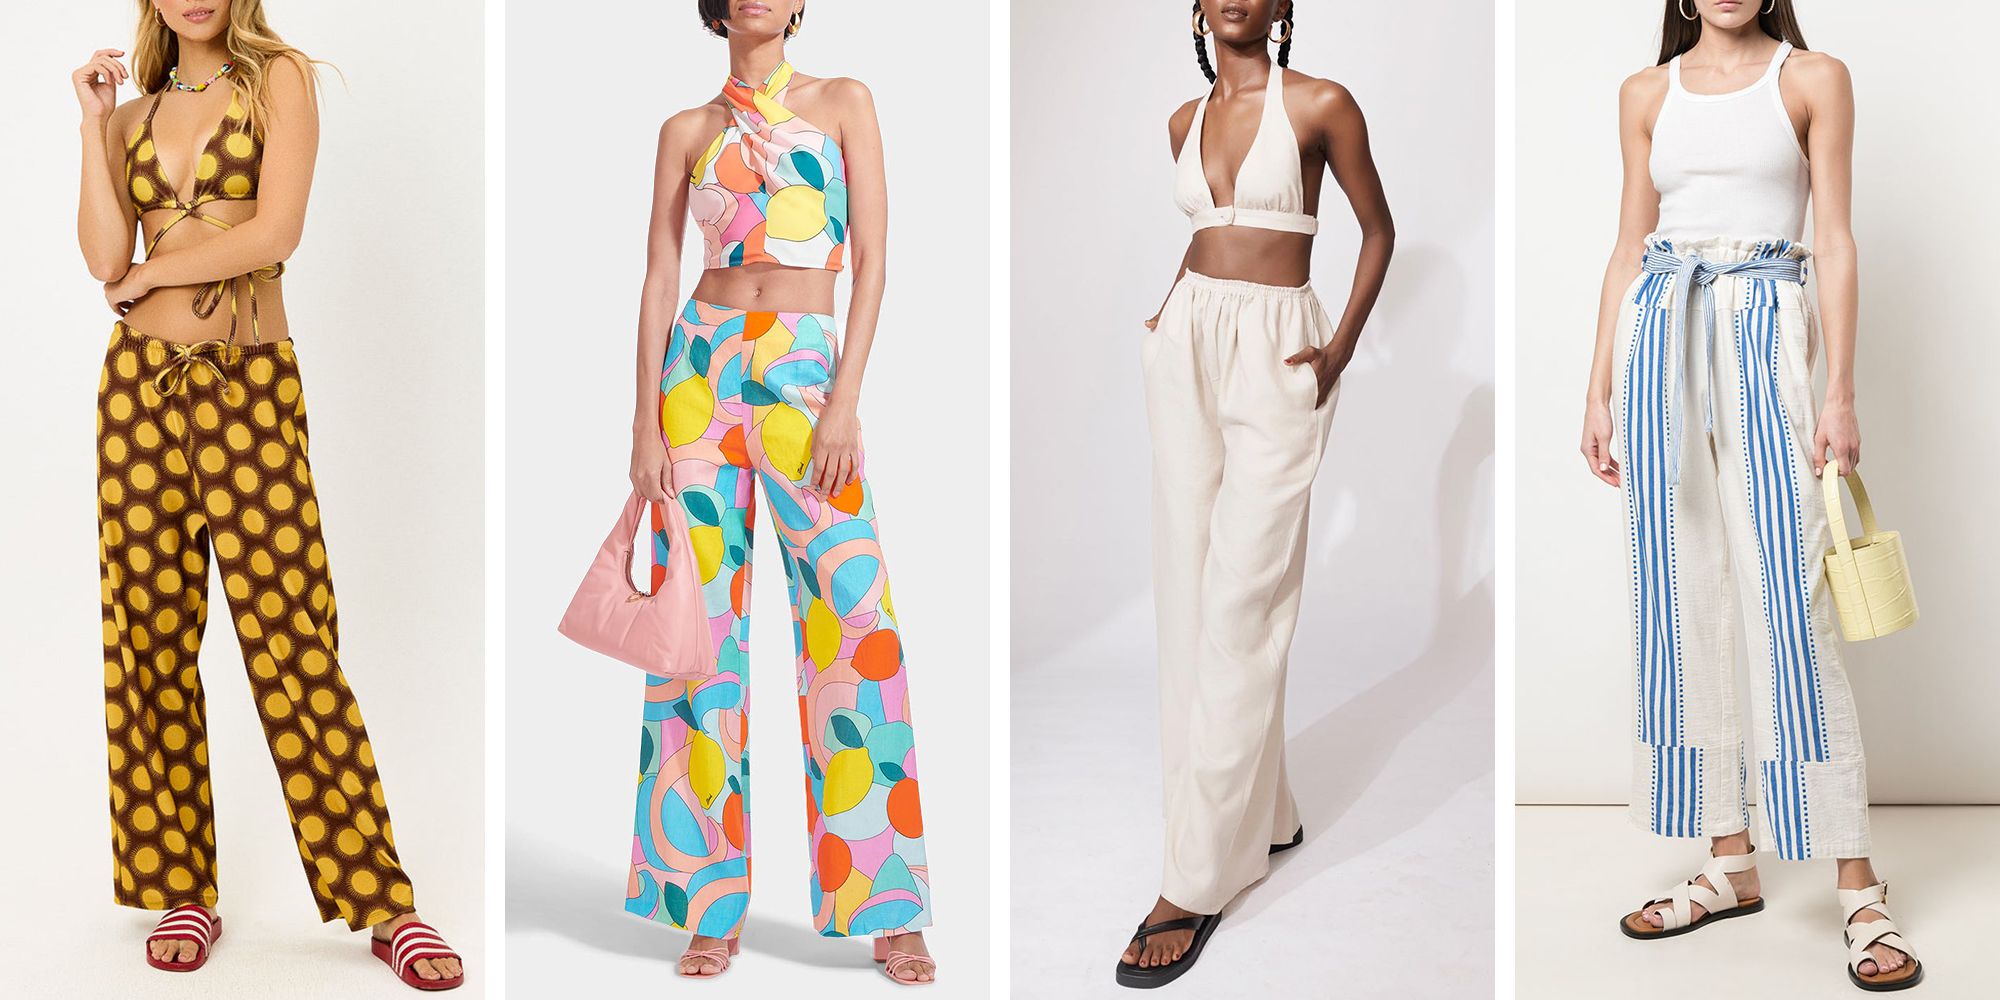 20 Beach Pants To Try This Summer if Cover-Ups Just Aren't Your Thing